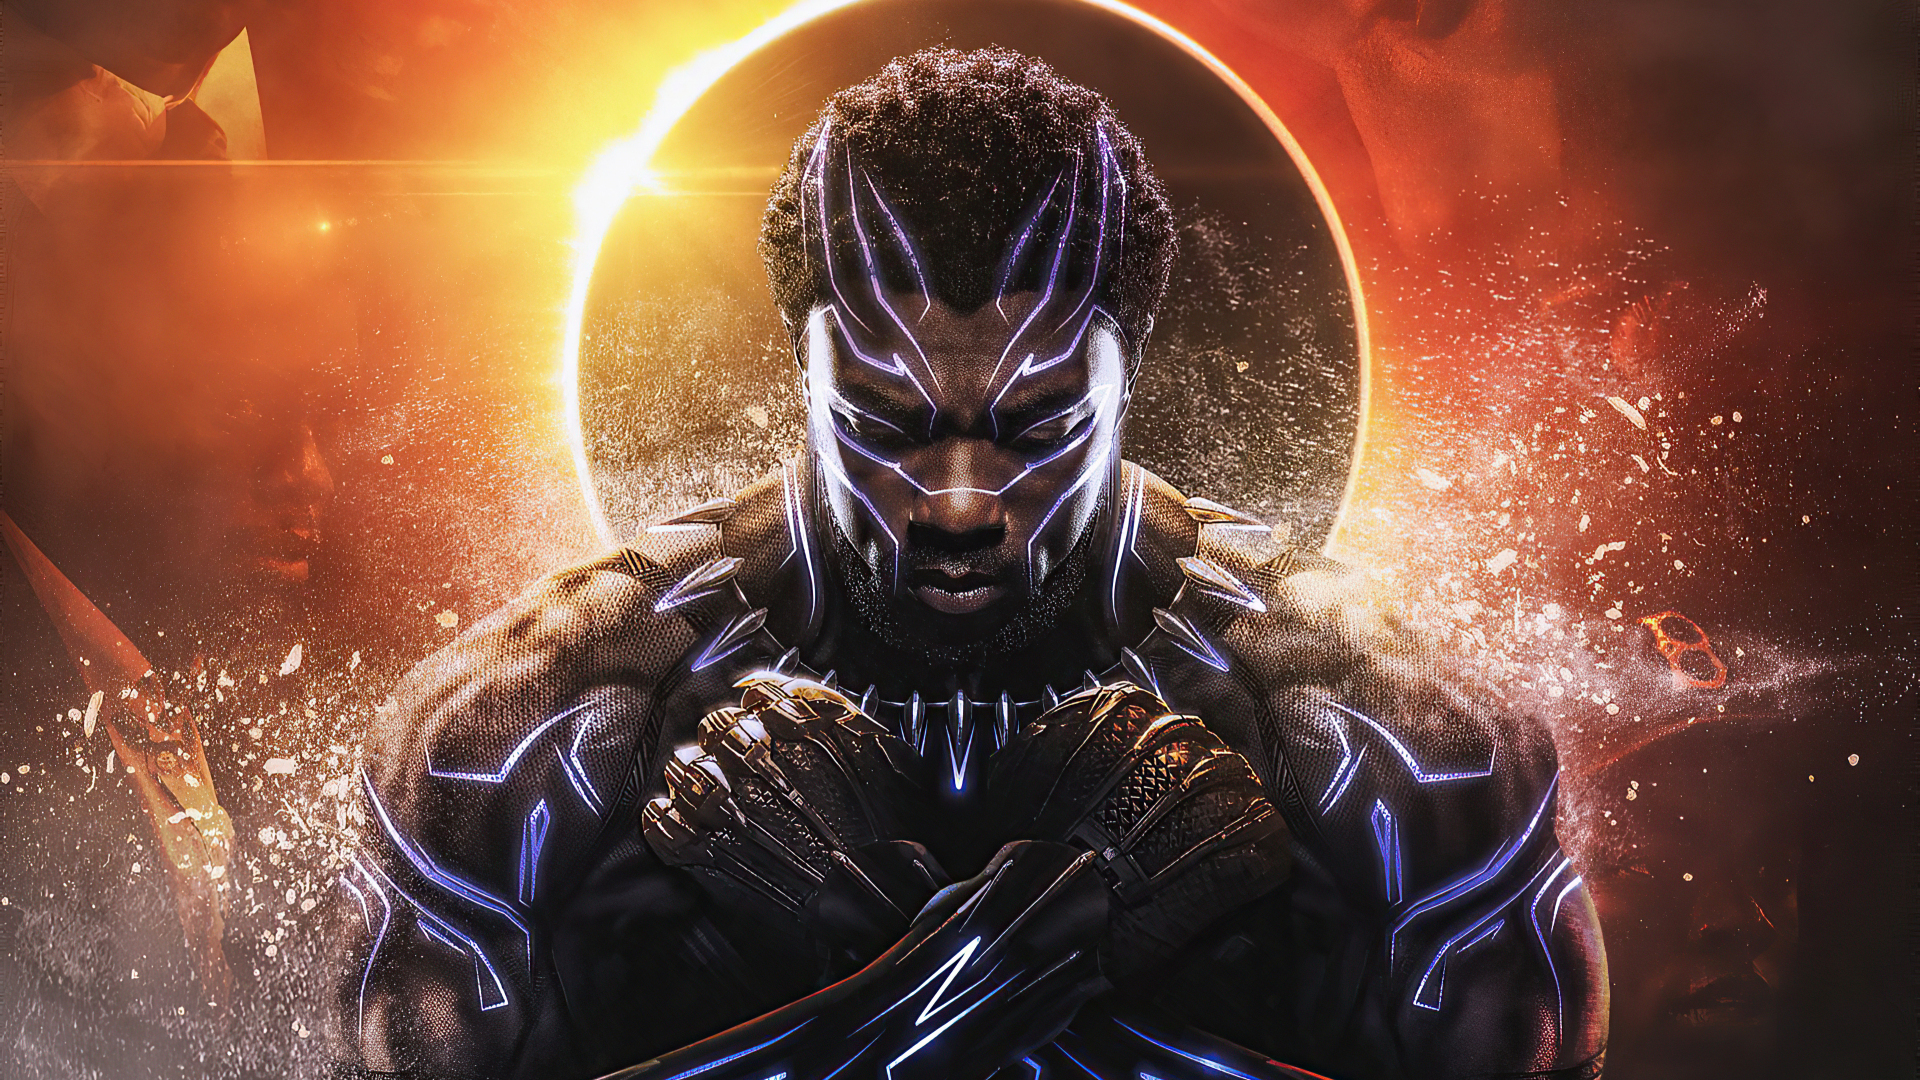 Black Panther: Wakanda Forever download the new for ios